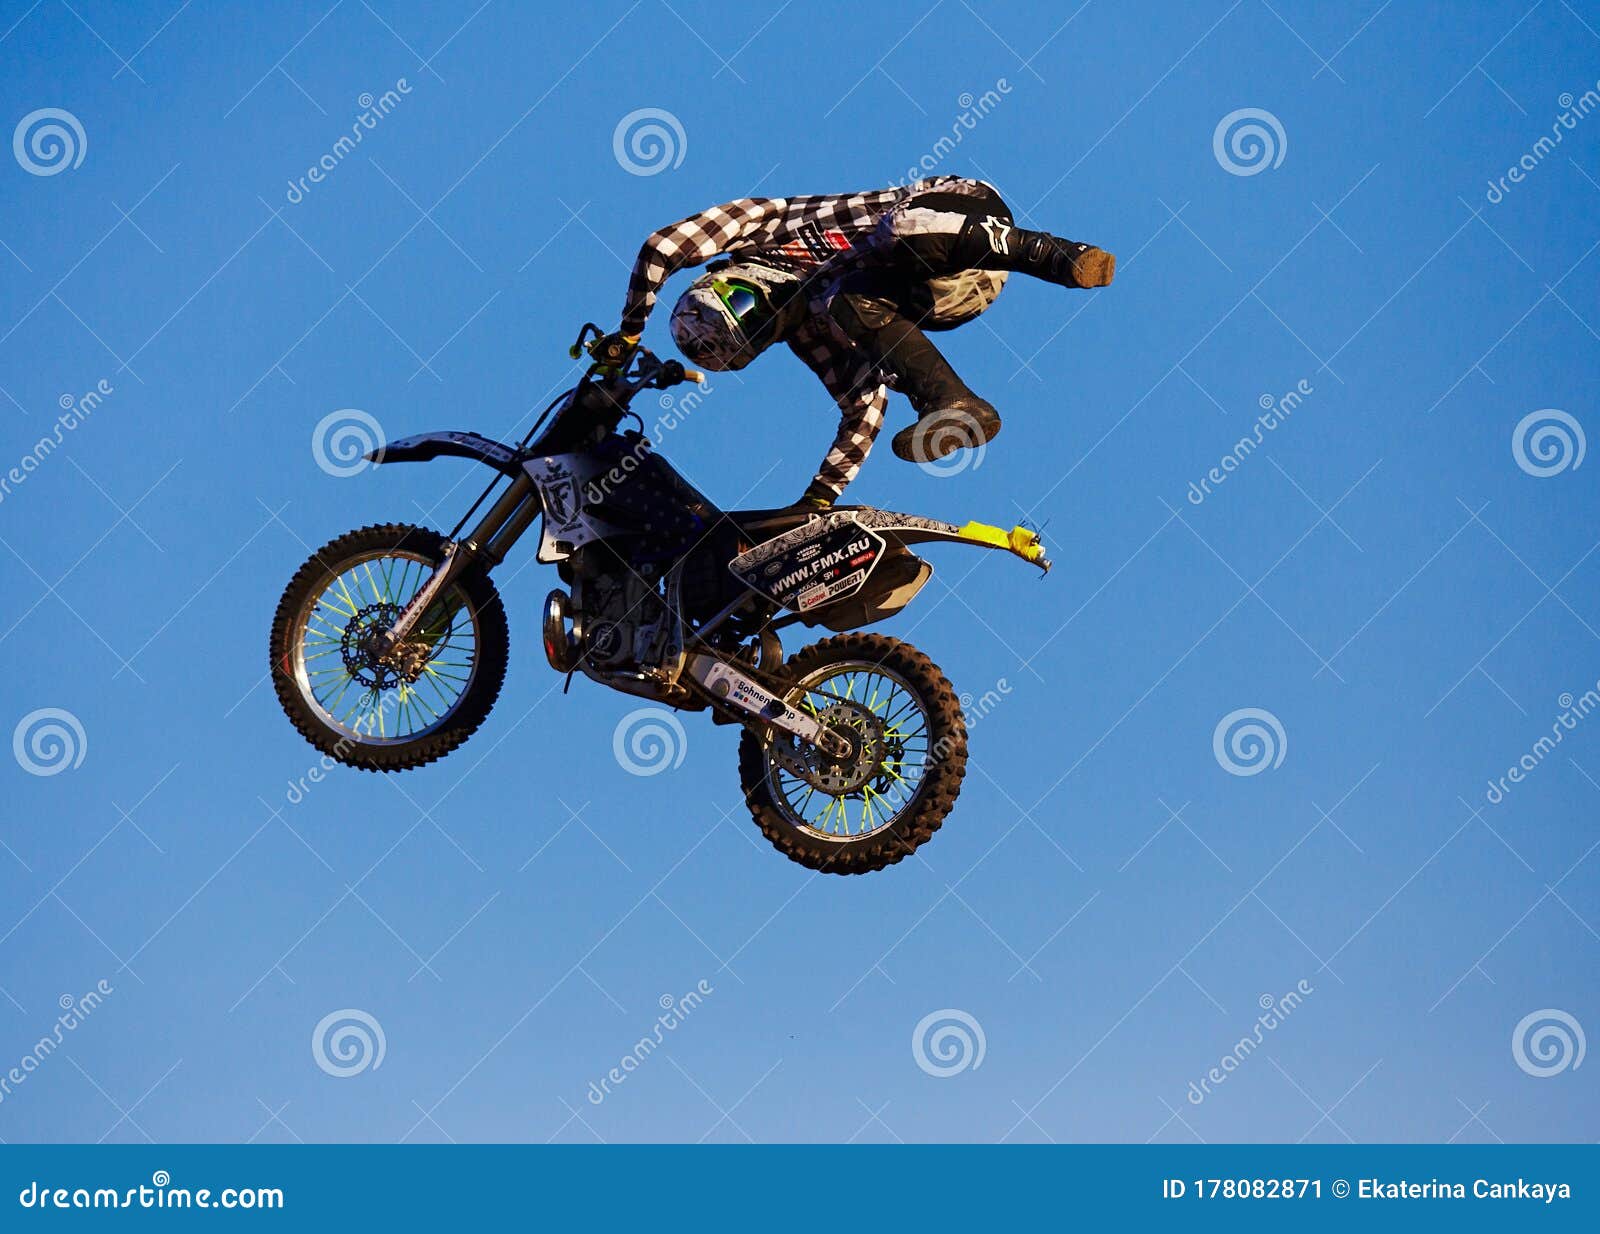 Moscow Russia September 23 17 Pro Motocross Rider Riding Fmx Motorbike Jumping Performing Extreme Stunt Professional Editorial Photo Image Of Jump Competition